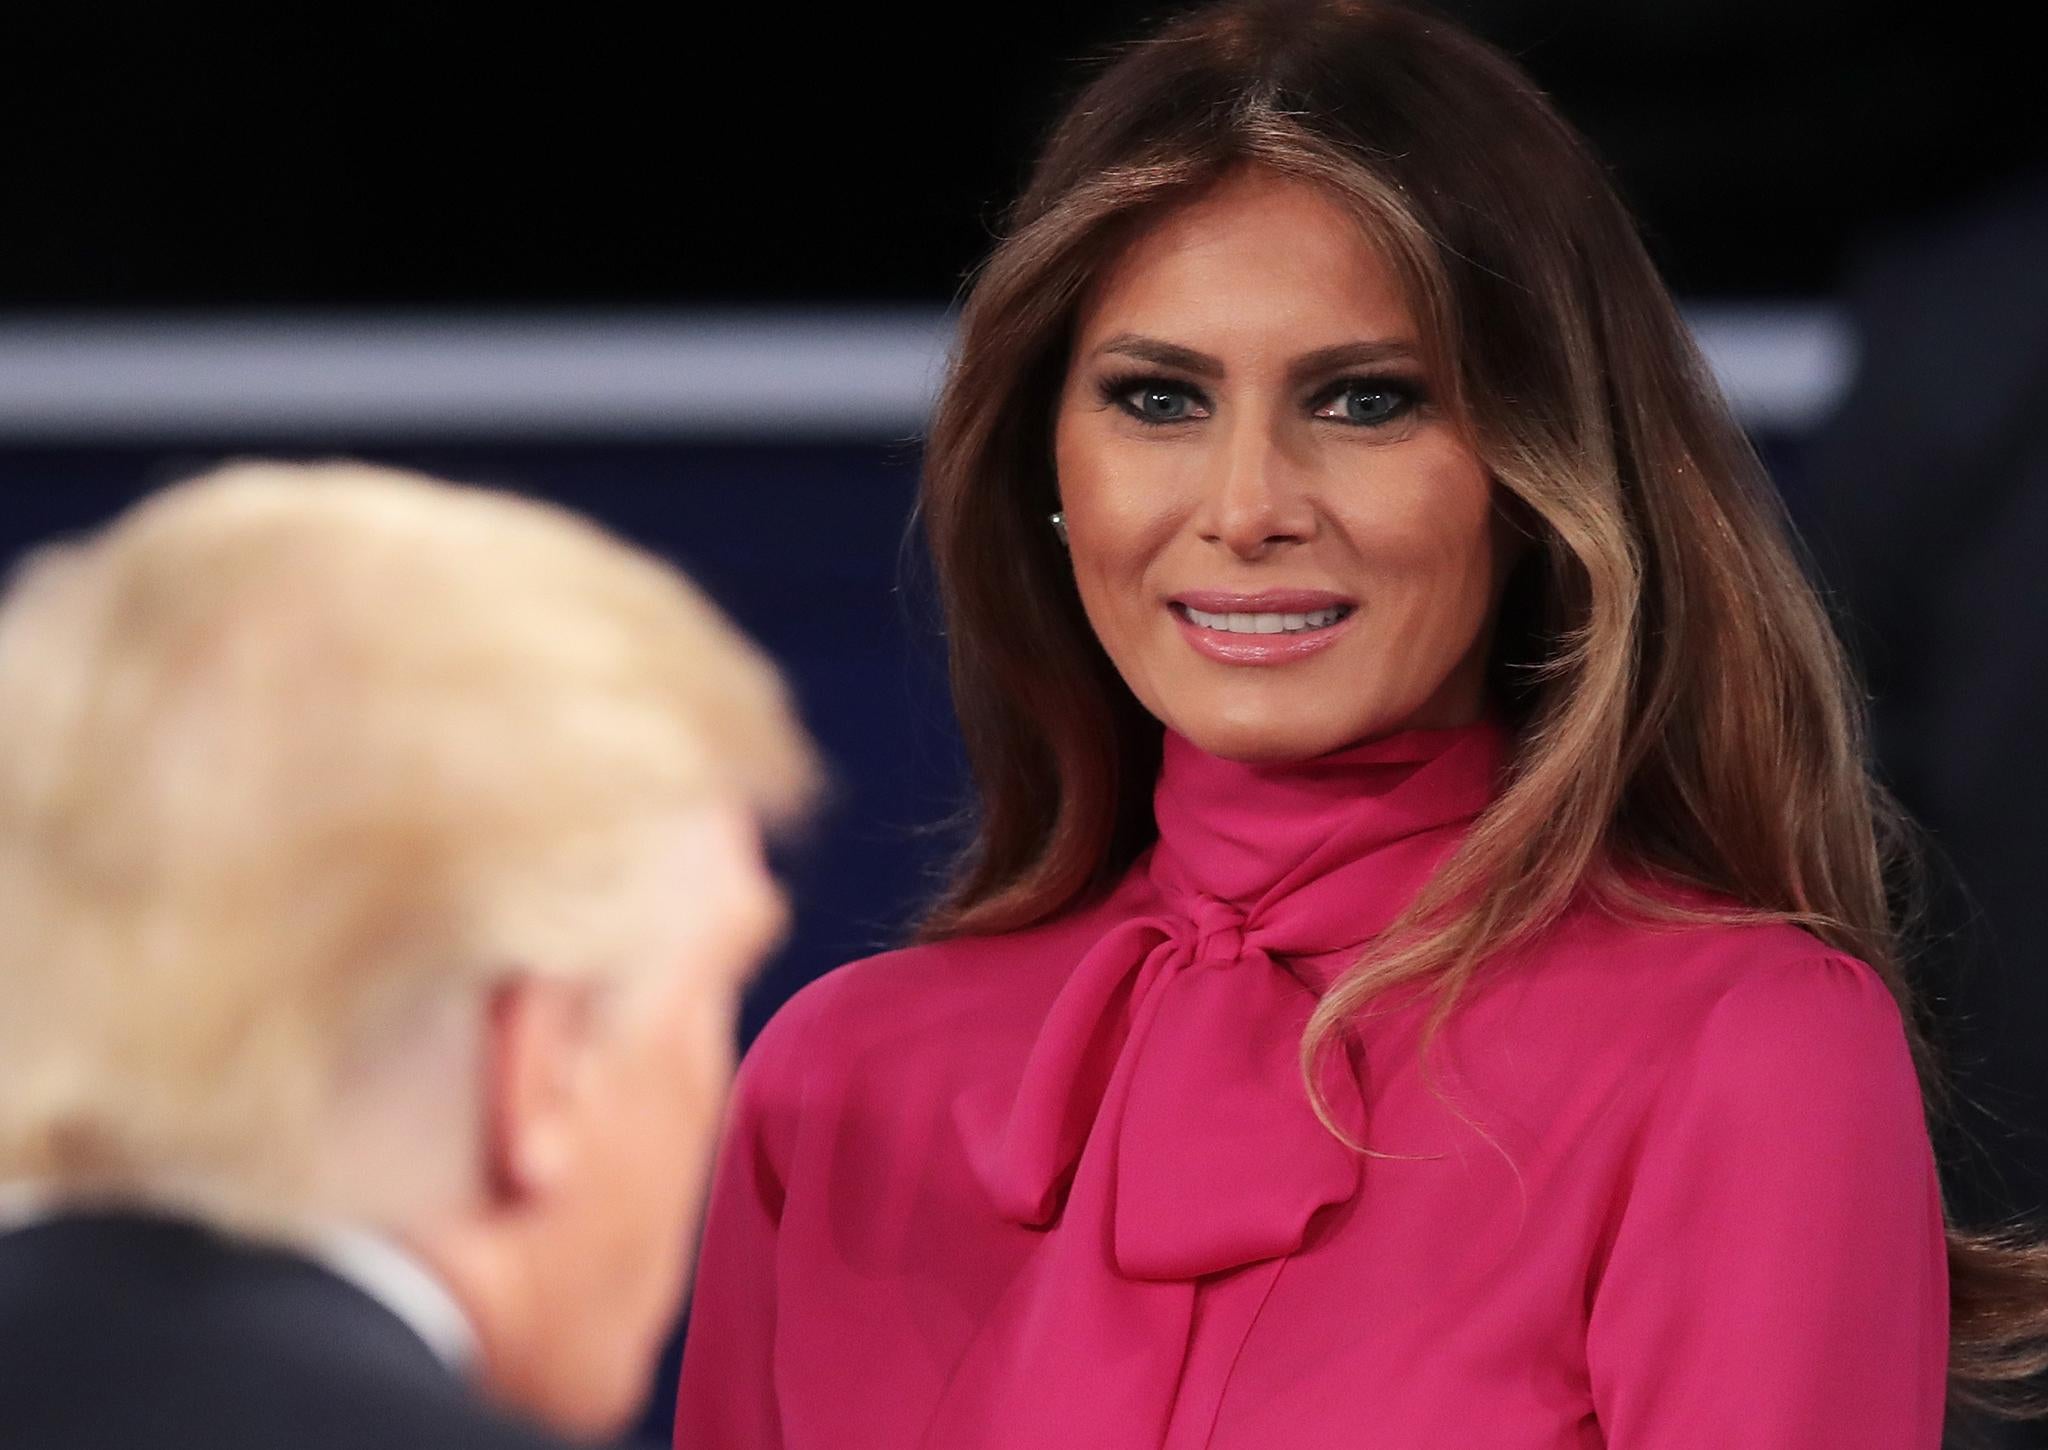 Melania Trump greets her husband Republican presidential nominee Donald Trump after the town hall debate at Washington University on October 9, 2016